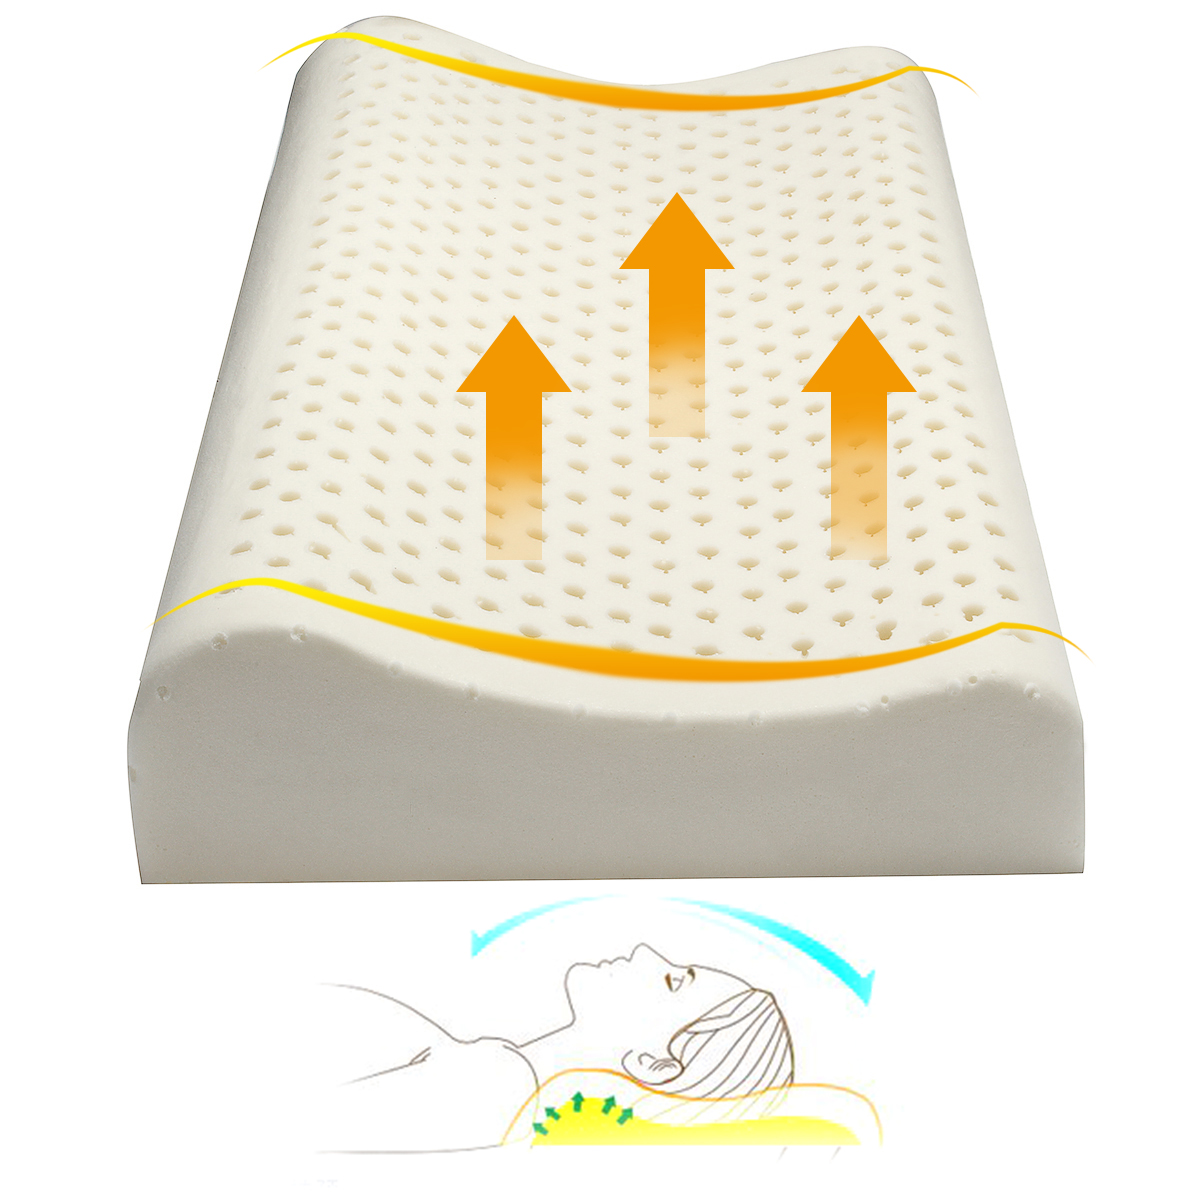 100-Natural-Standard-Latex-Pillow-Comfort-for-Neck-Pain-Fatigue-Relief-1370339